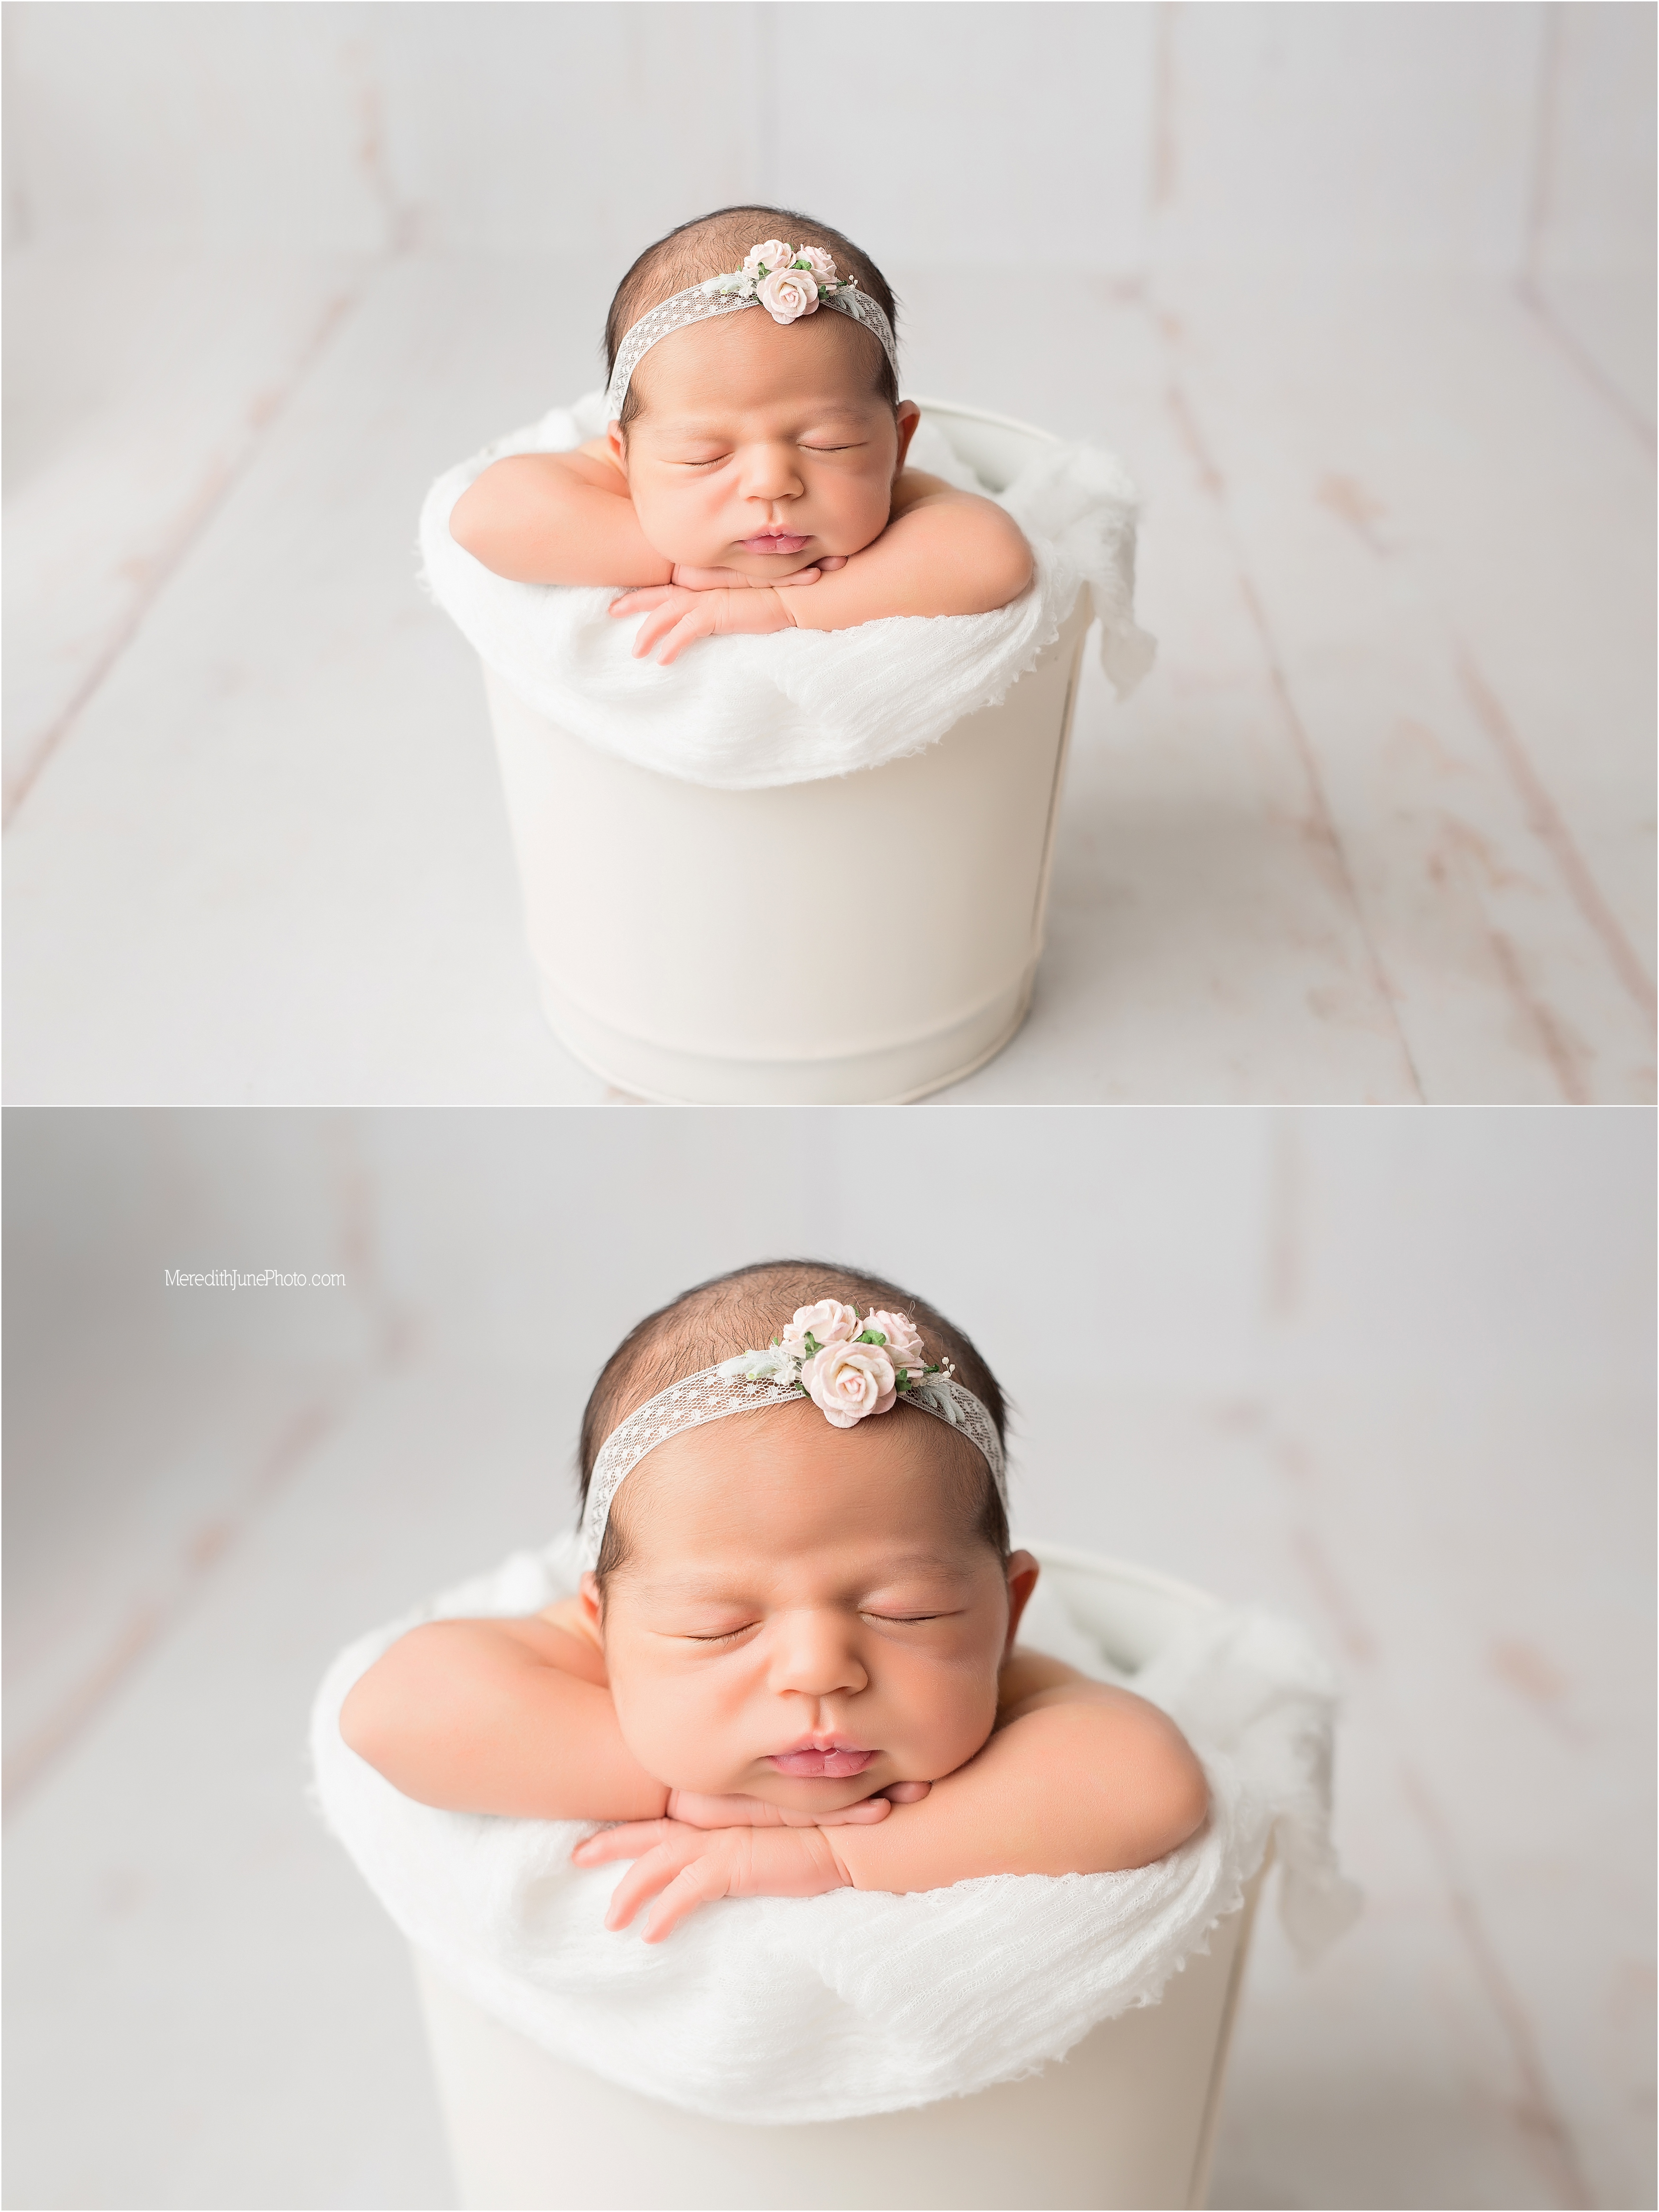 Baby Danielle's newborn photo session at Meredith June Photography 